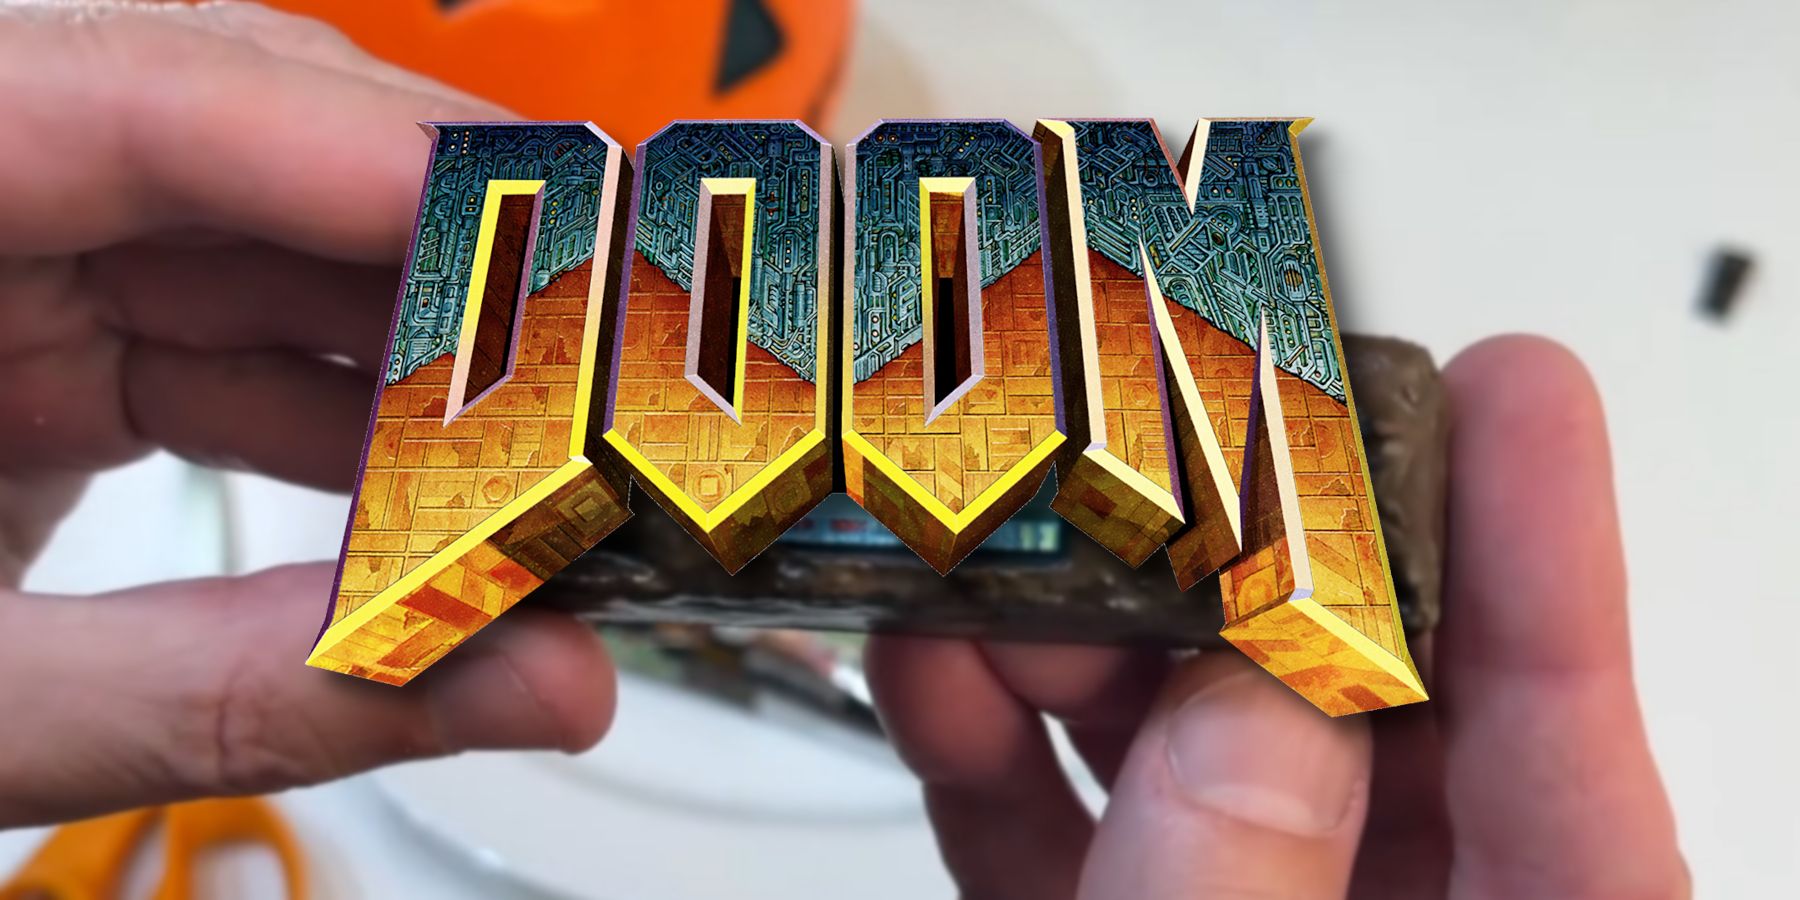 The Doom logo with a hand holding a fake chocolate bar behind it.